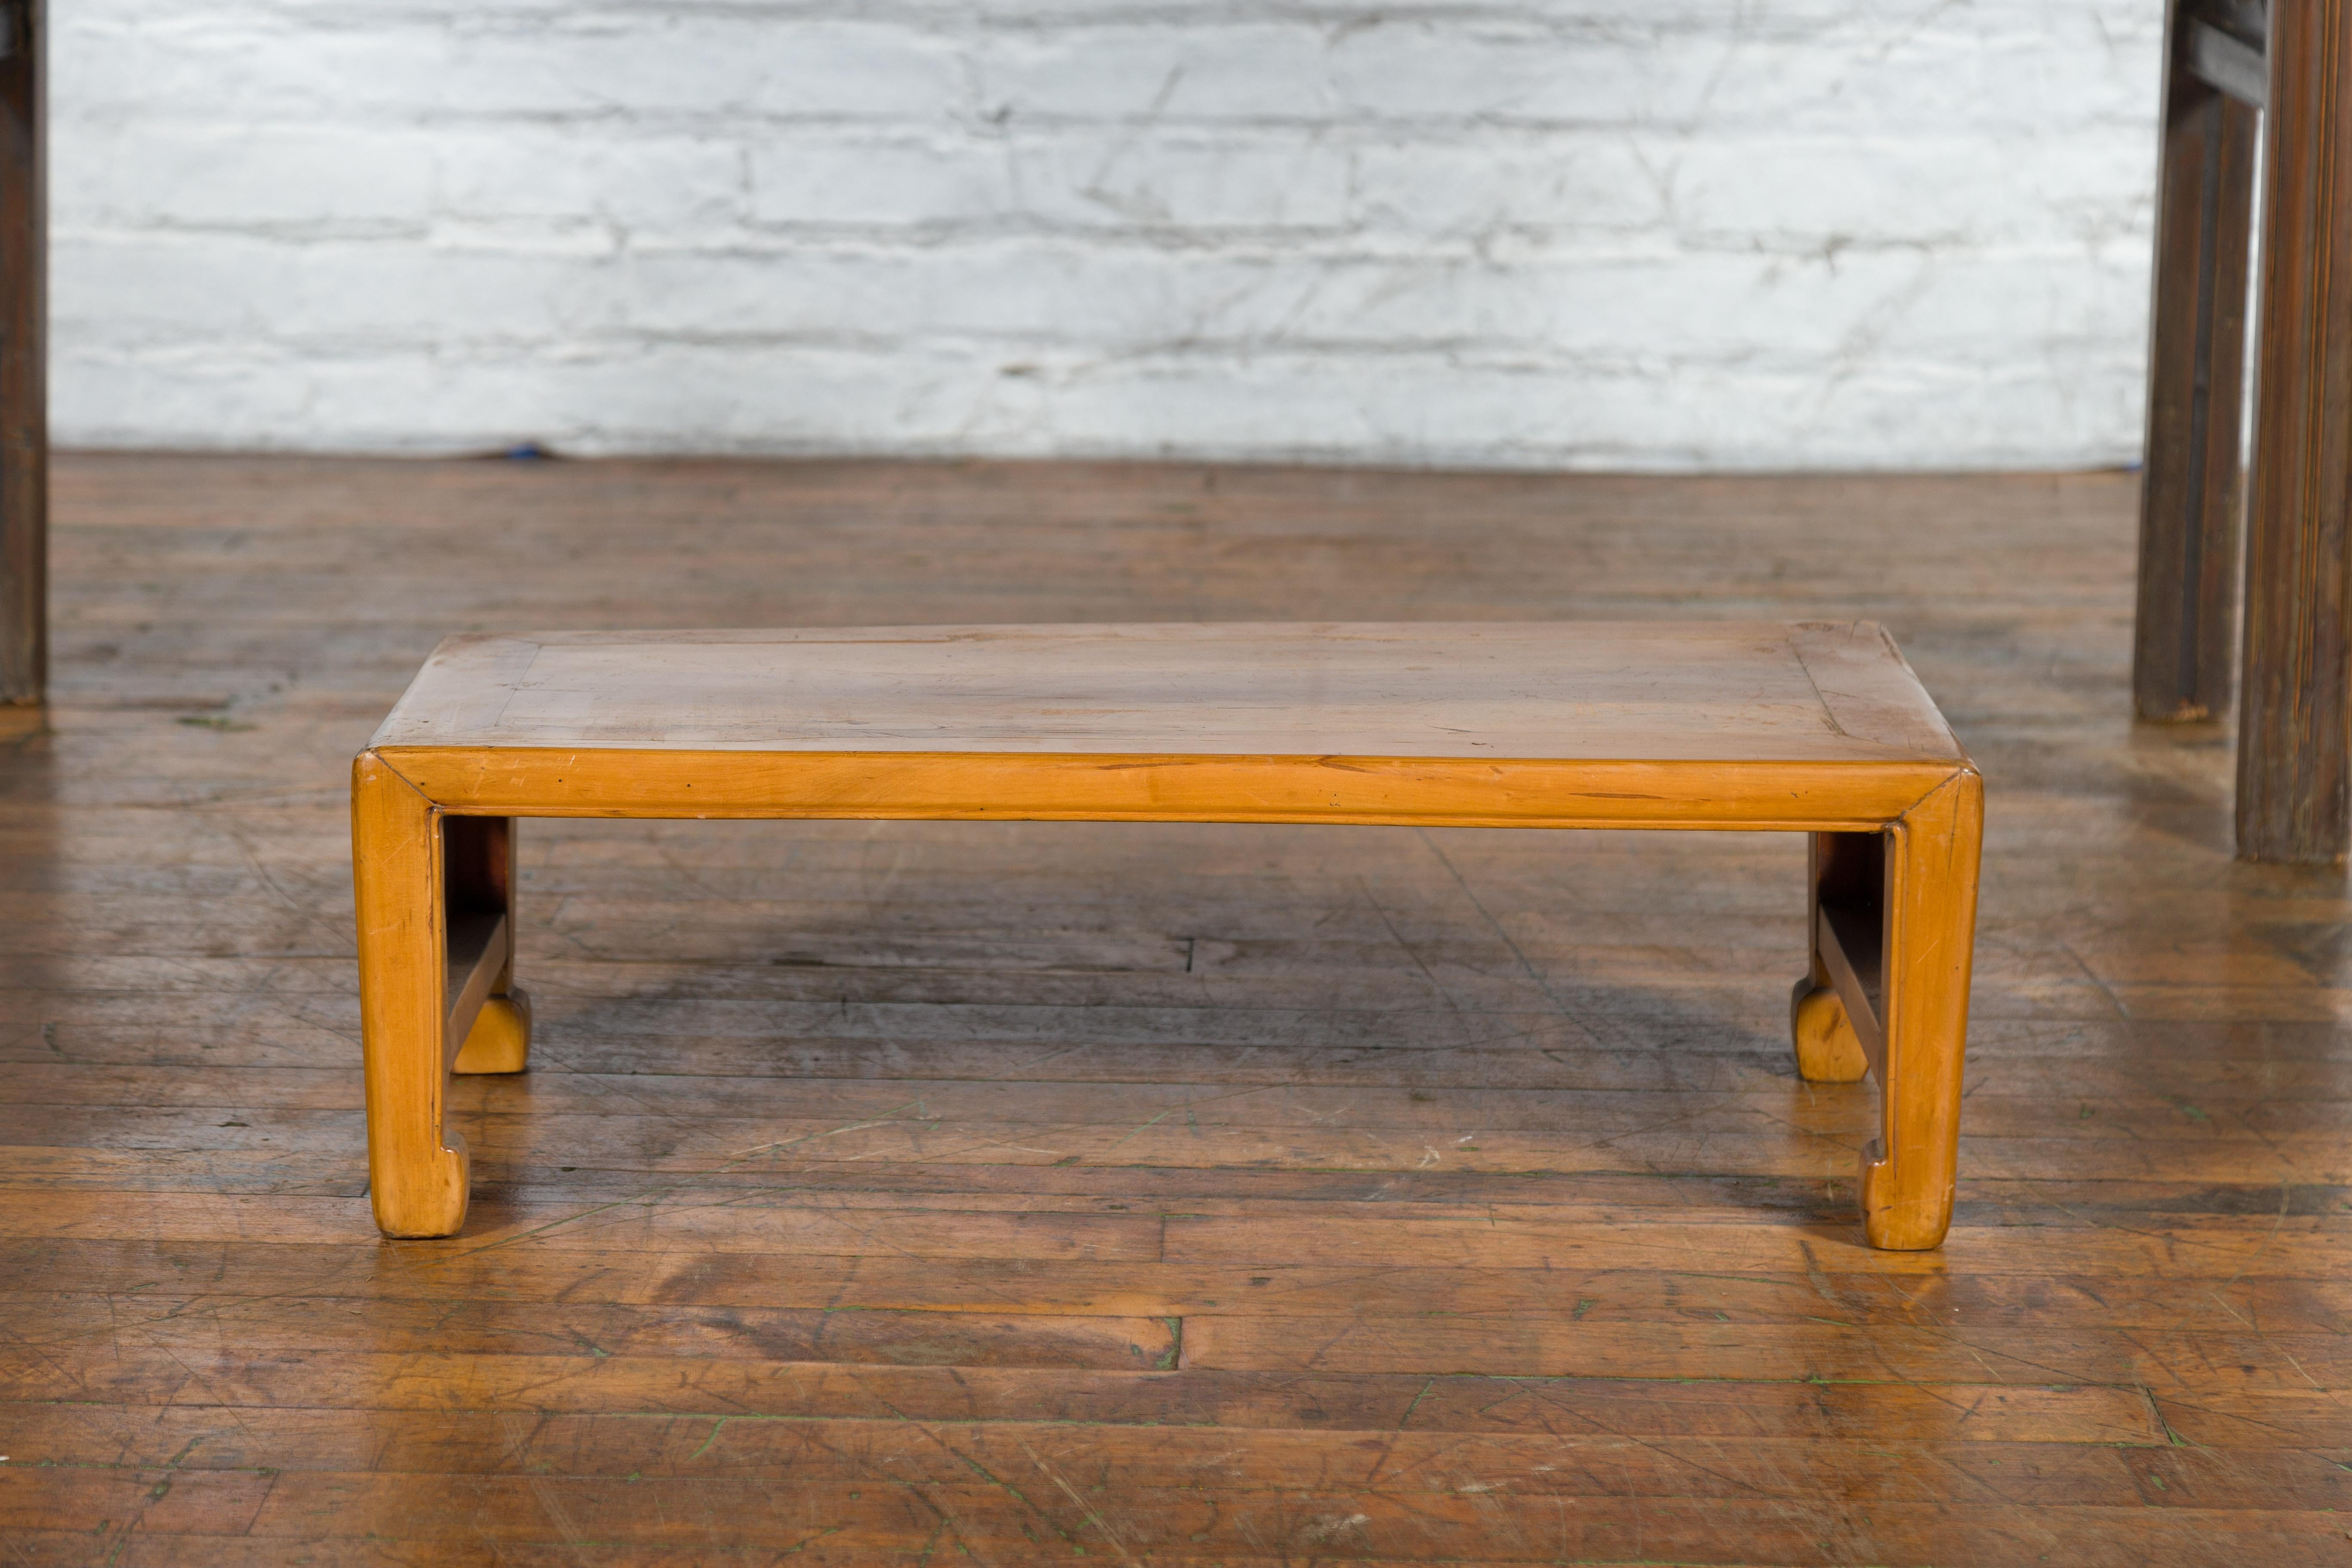 A vintage Chinese low kang table from the mid-20th century, with pierced sides and horse hoof feet. Created in China during the midcentury period, this low kang table features a rectangular top with central board, sitting above four straight legs